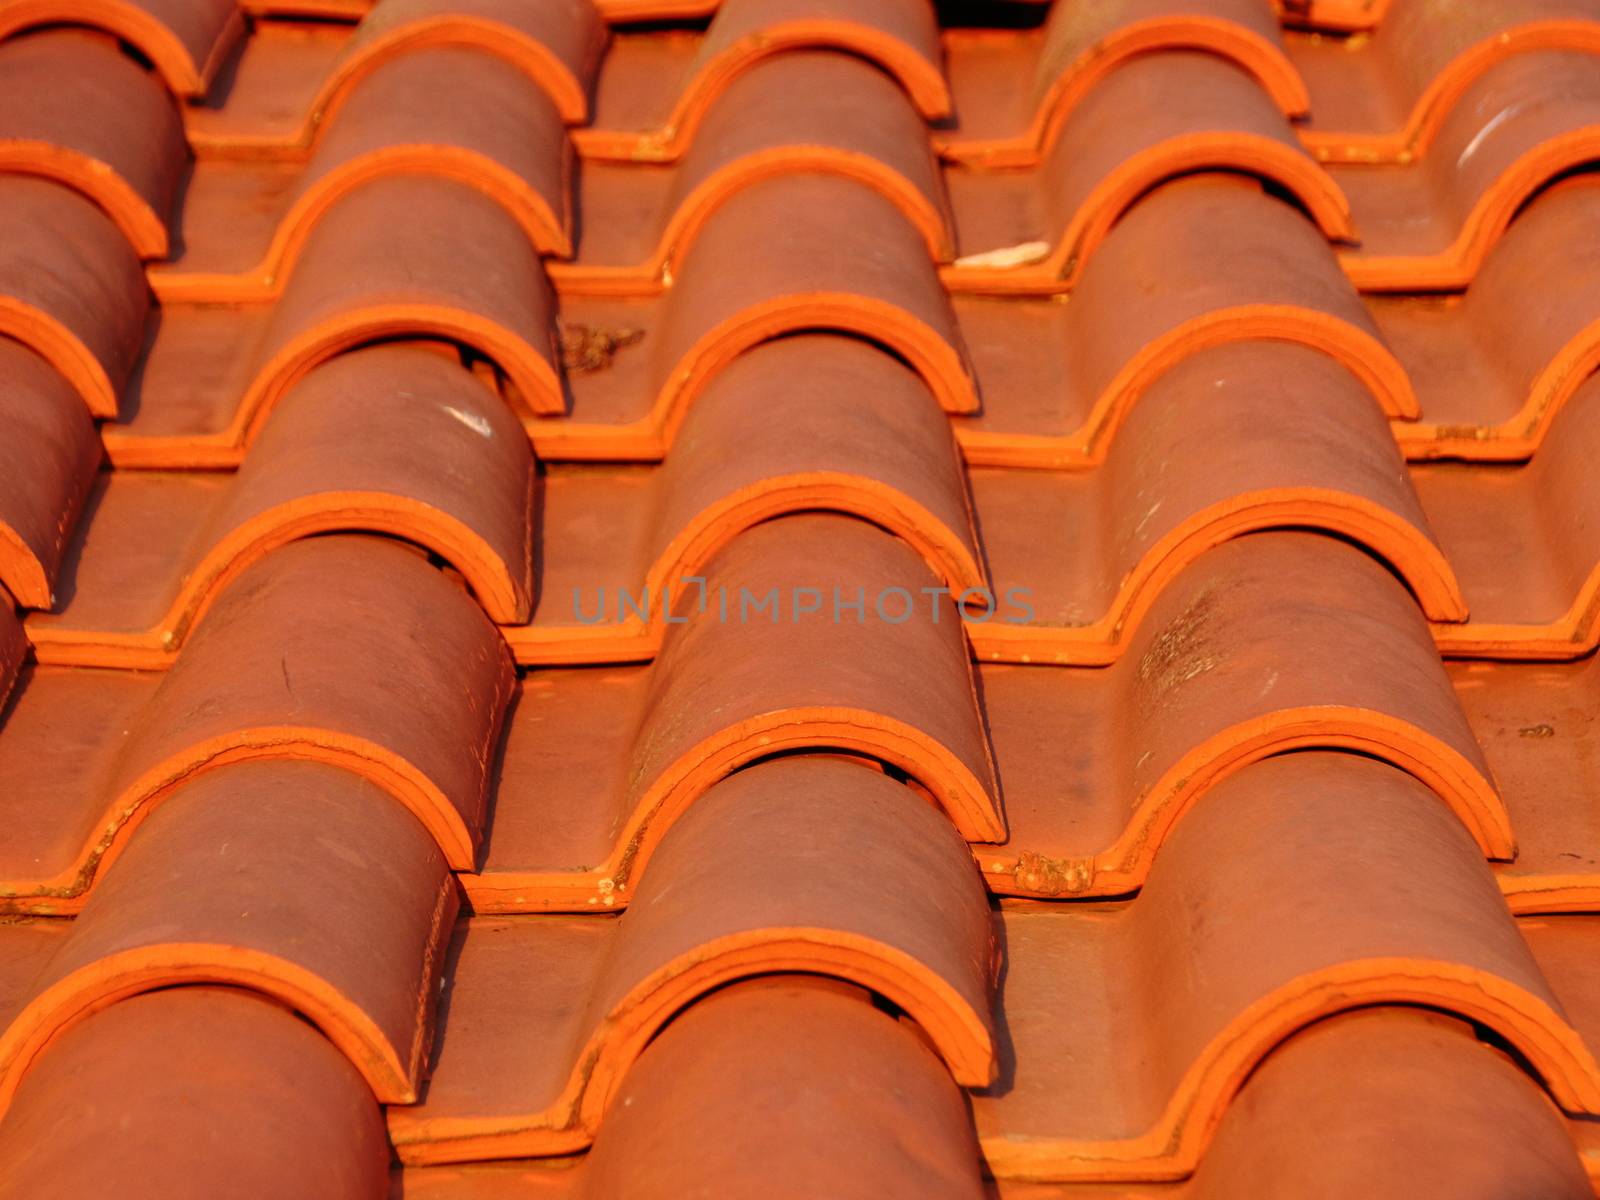 New Tile Brick Roof in Red Colors by HoleInTheBox